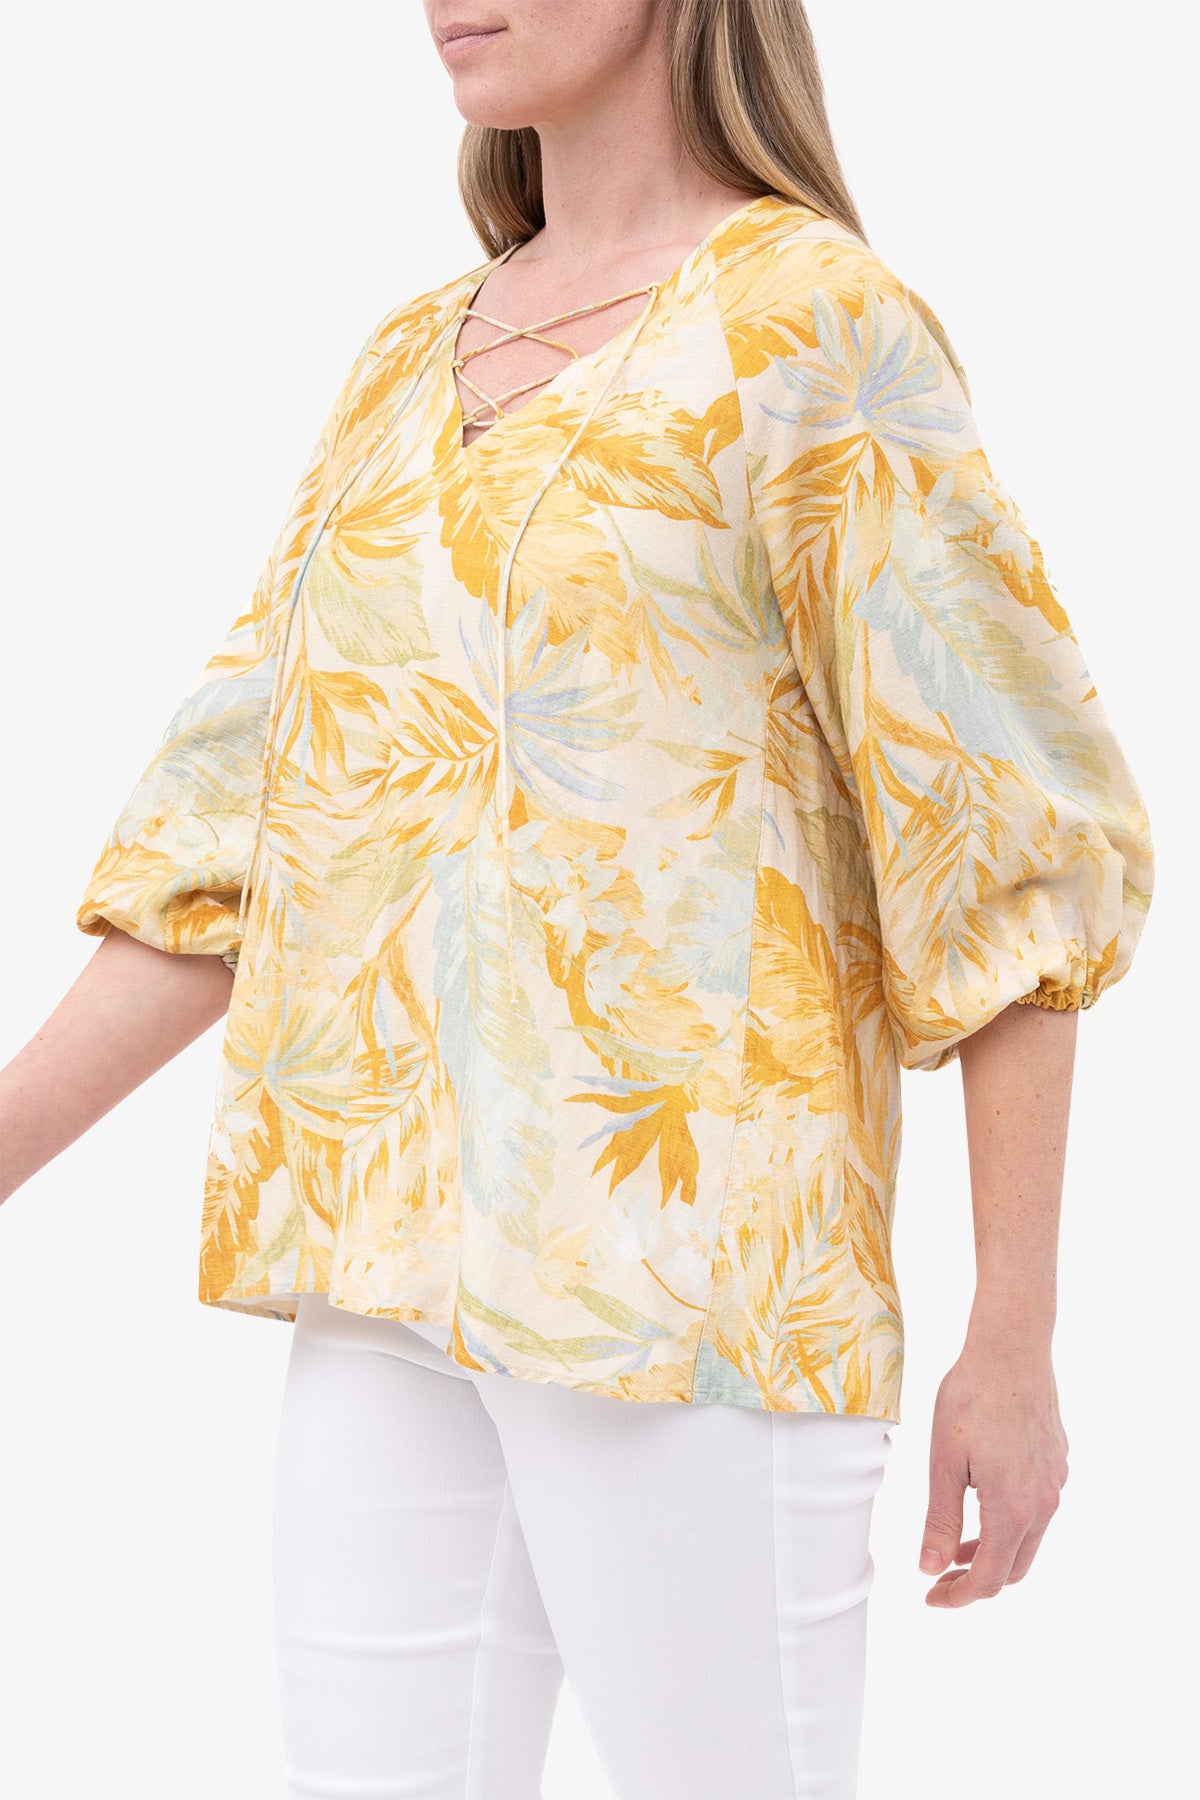 Ethereal Print Lace Up Blouse Yellow